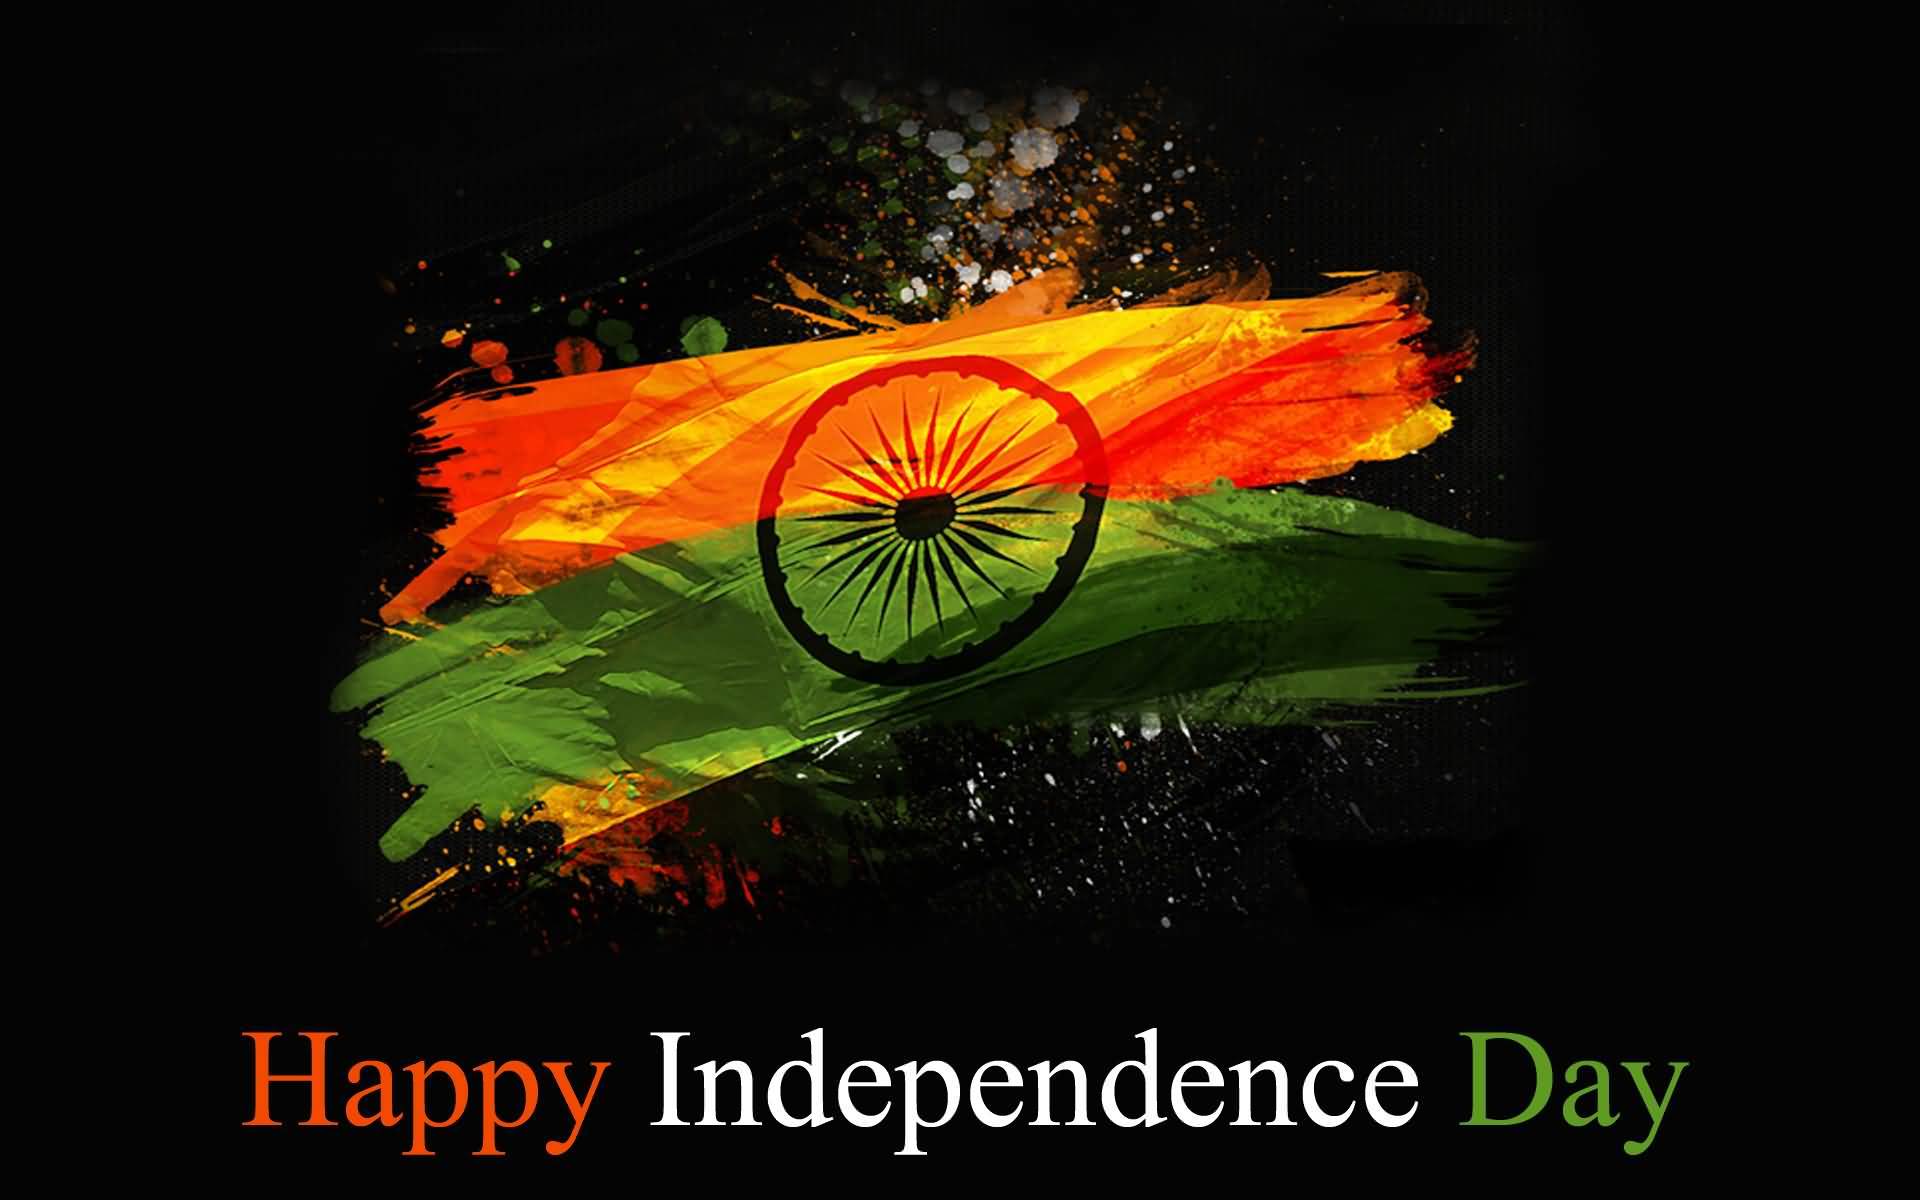 Happy Independence Day Indian Flag Wallpaper - Happy Independence Day India 2018 - HD Wallpaper 